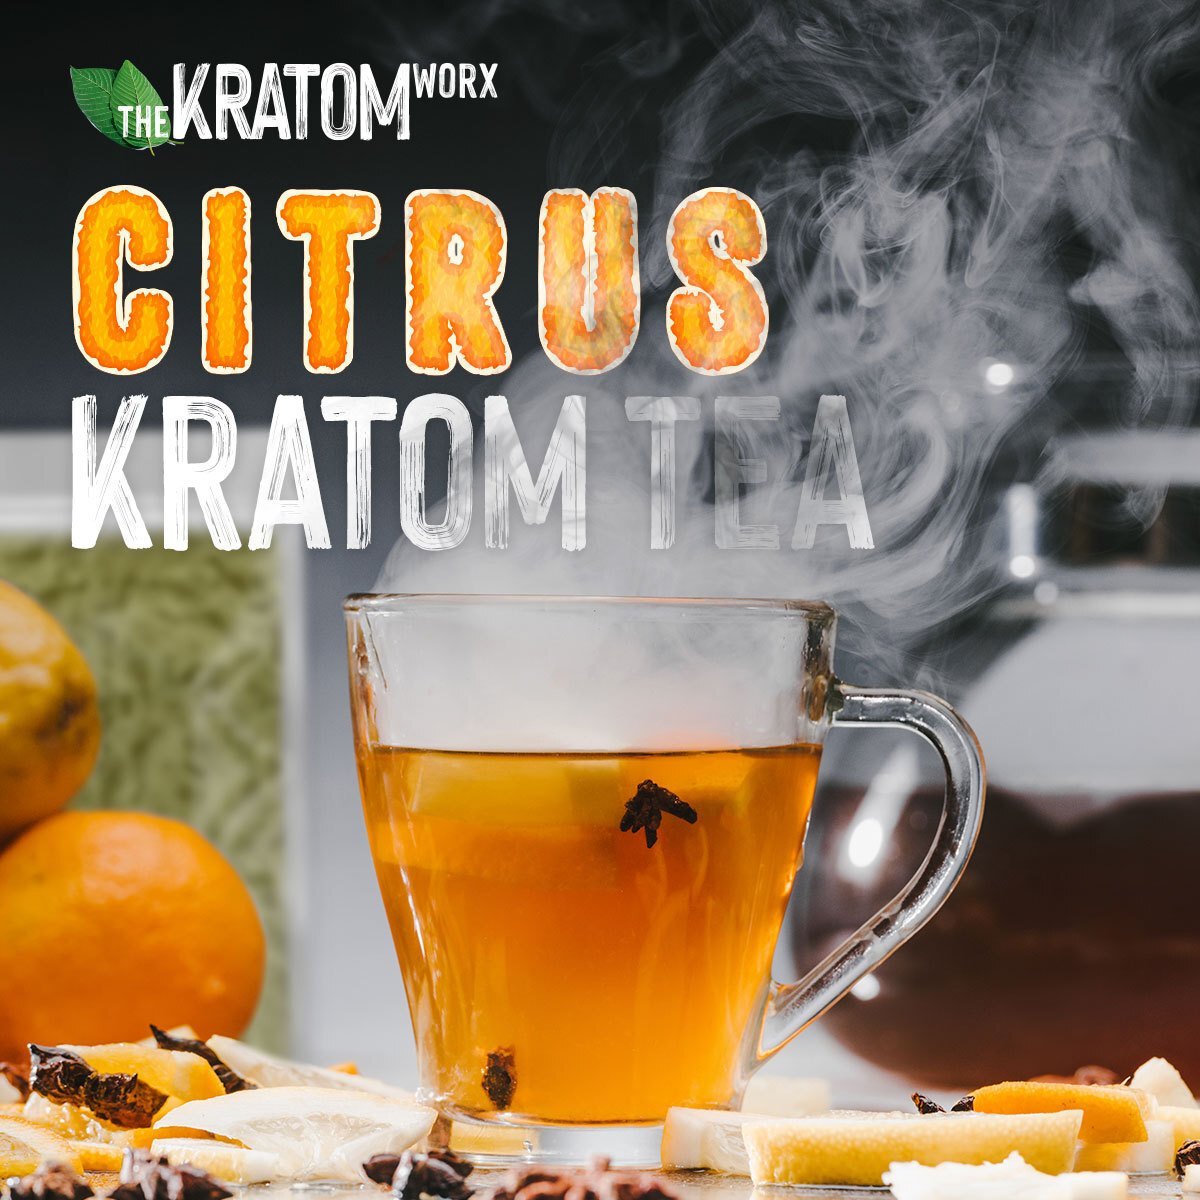 Refresh Yourself with Our Citrus Kratom Tea Recipe